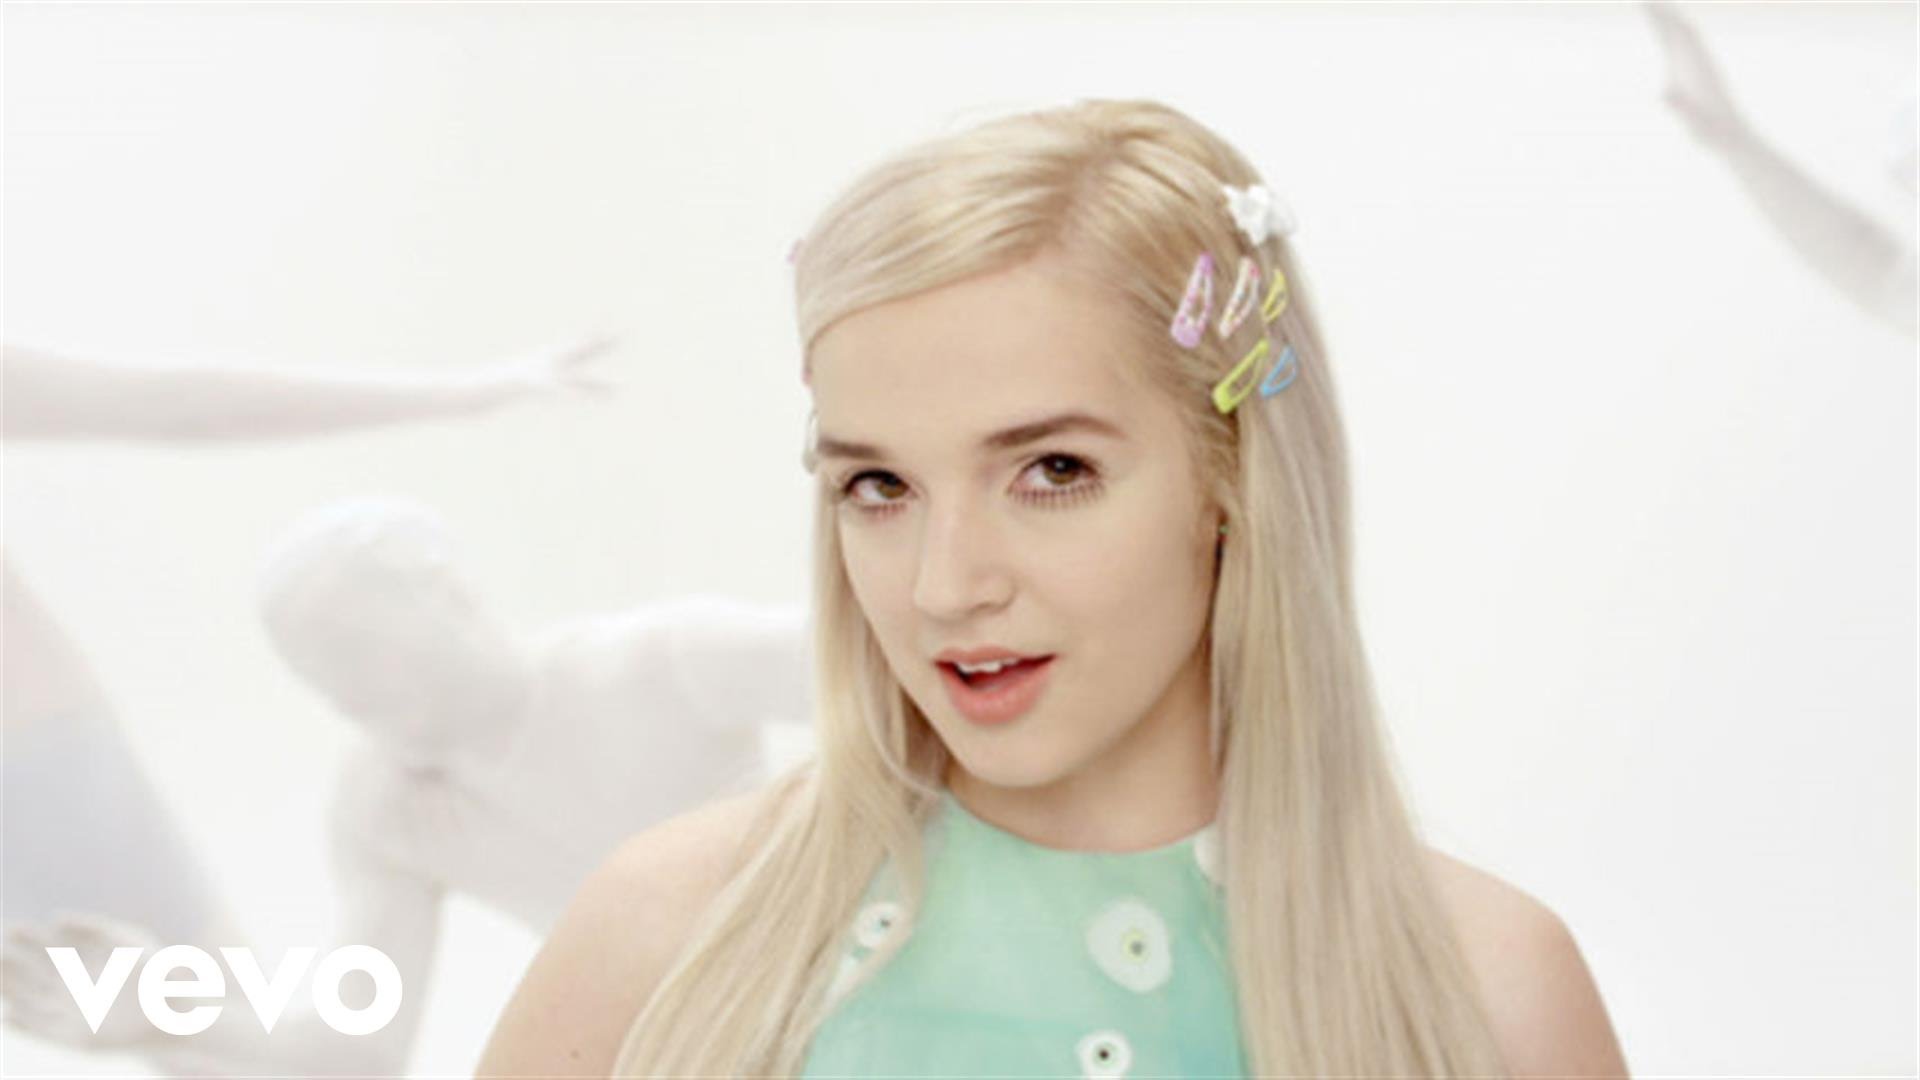 Where really is That Poppy now? Wiki: Parents, Son, Money, Real Name